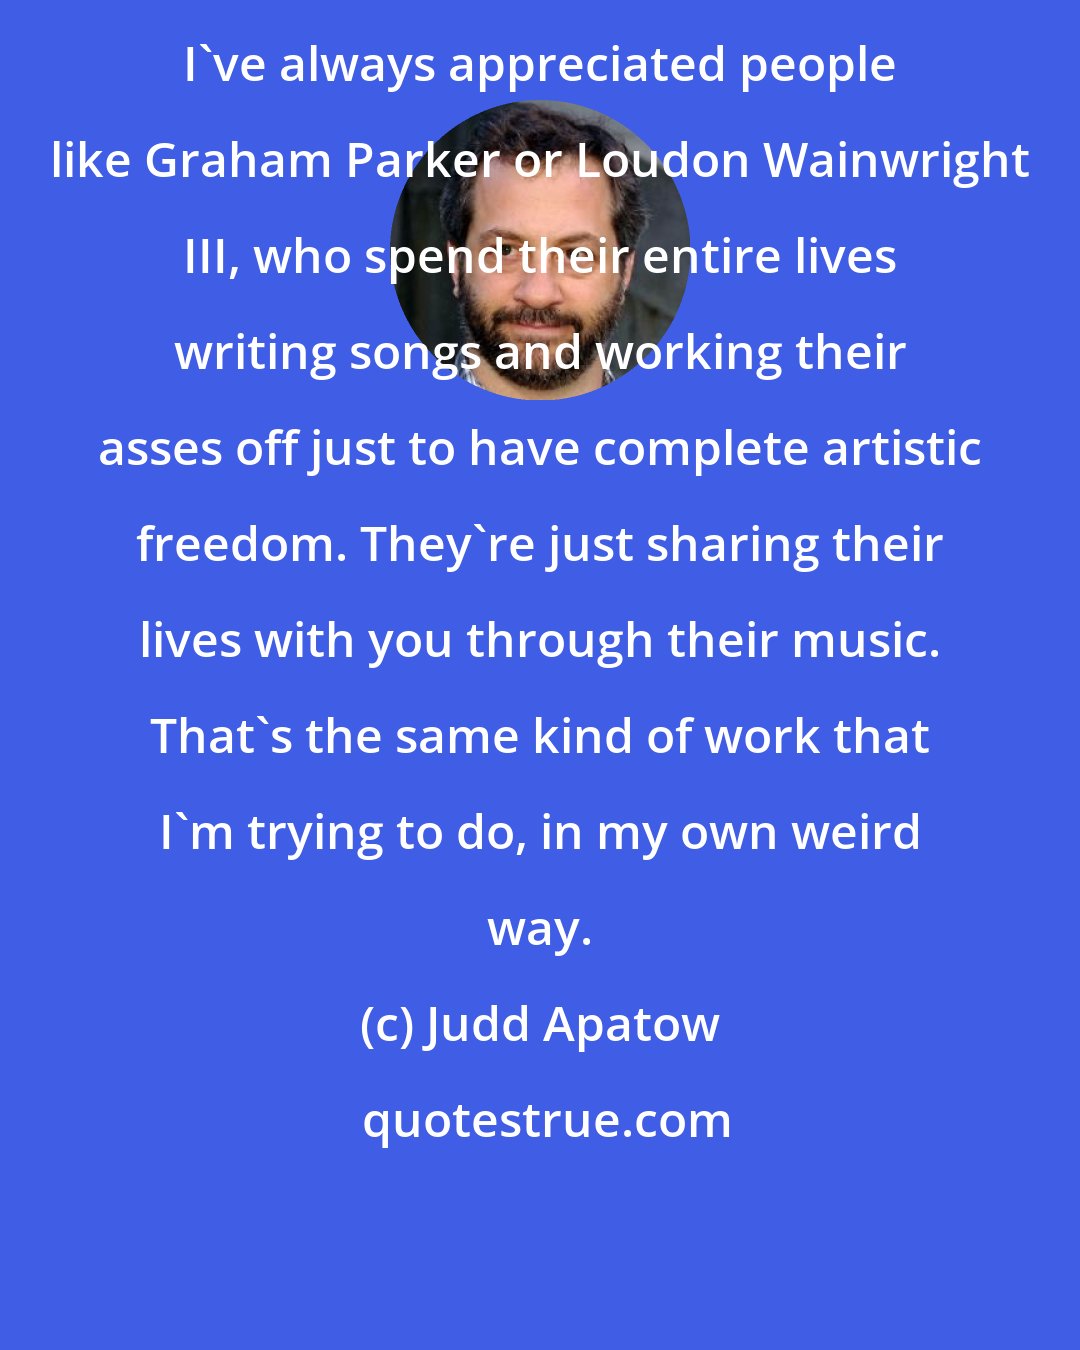 Judd Apatow: I've always appreciated people like Graham Parker or Loudon Wainwright III, who spend their entire lives writing songs and working their asses off just to have complete artistic freedom. They're just sharing their lives with you through their music. That's the same kind of work that I'm trying to do, in my own weird way.